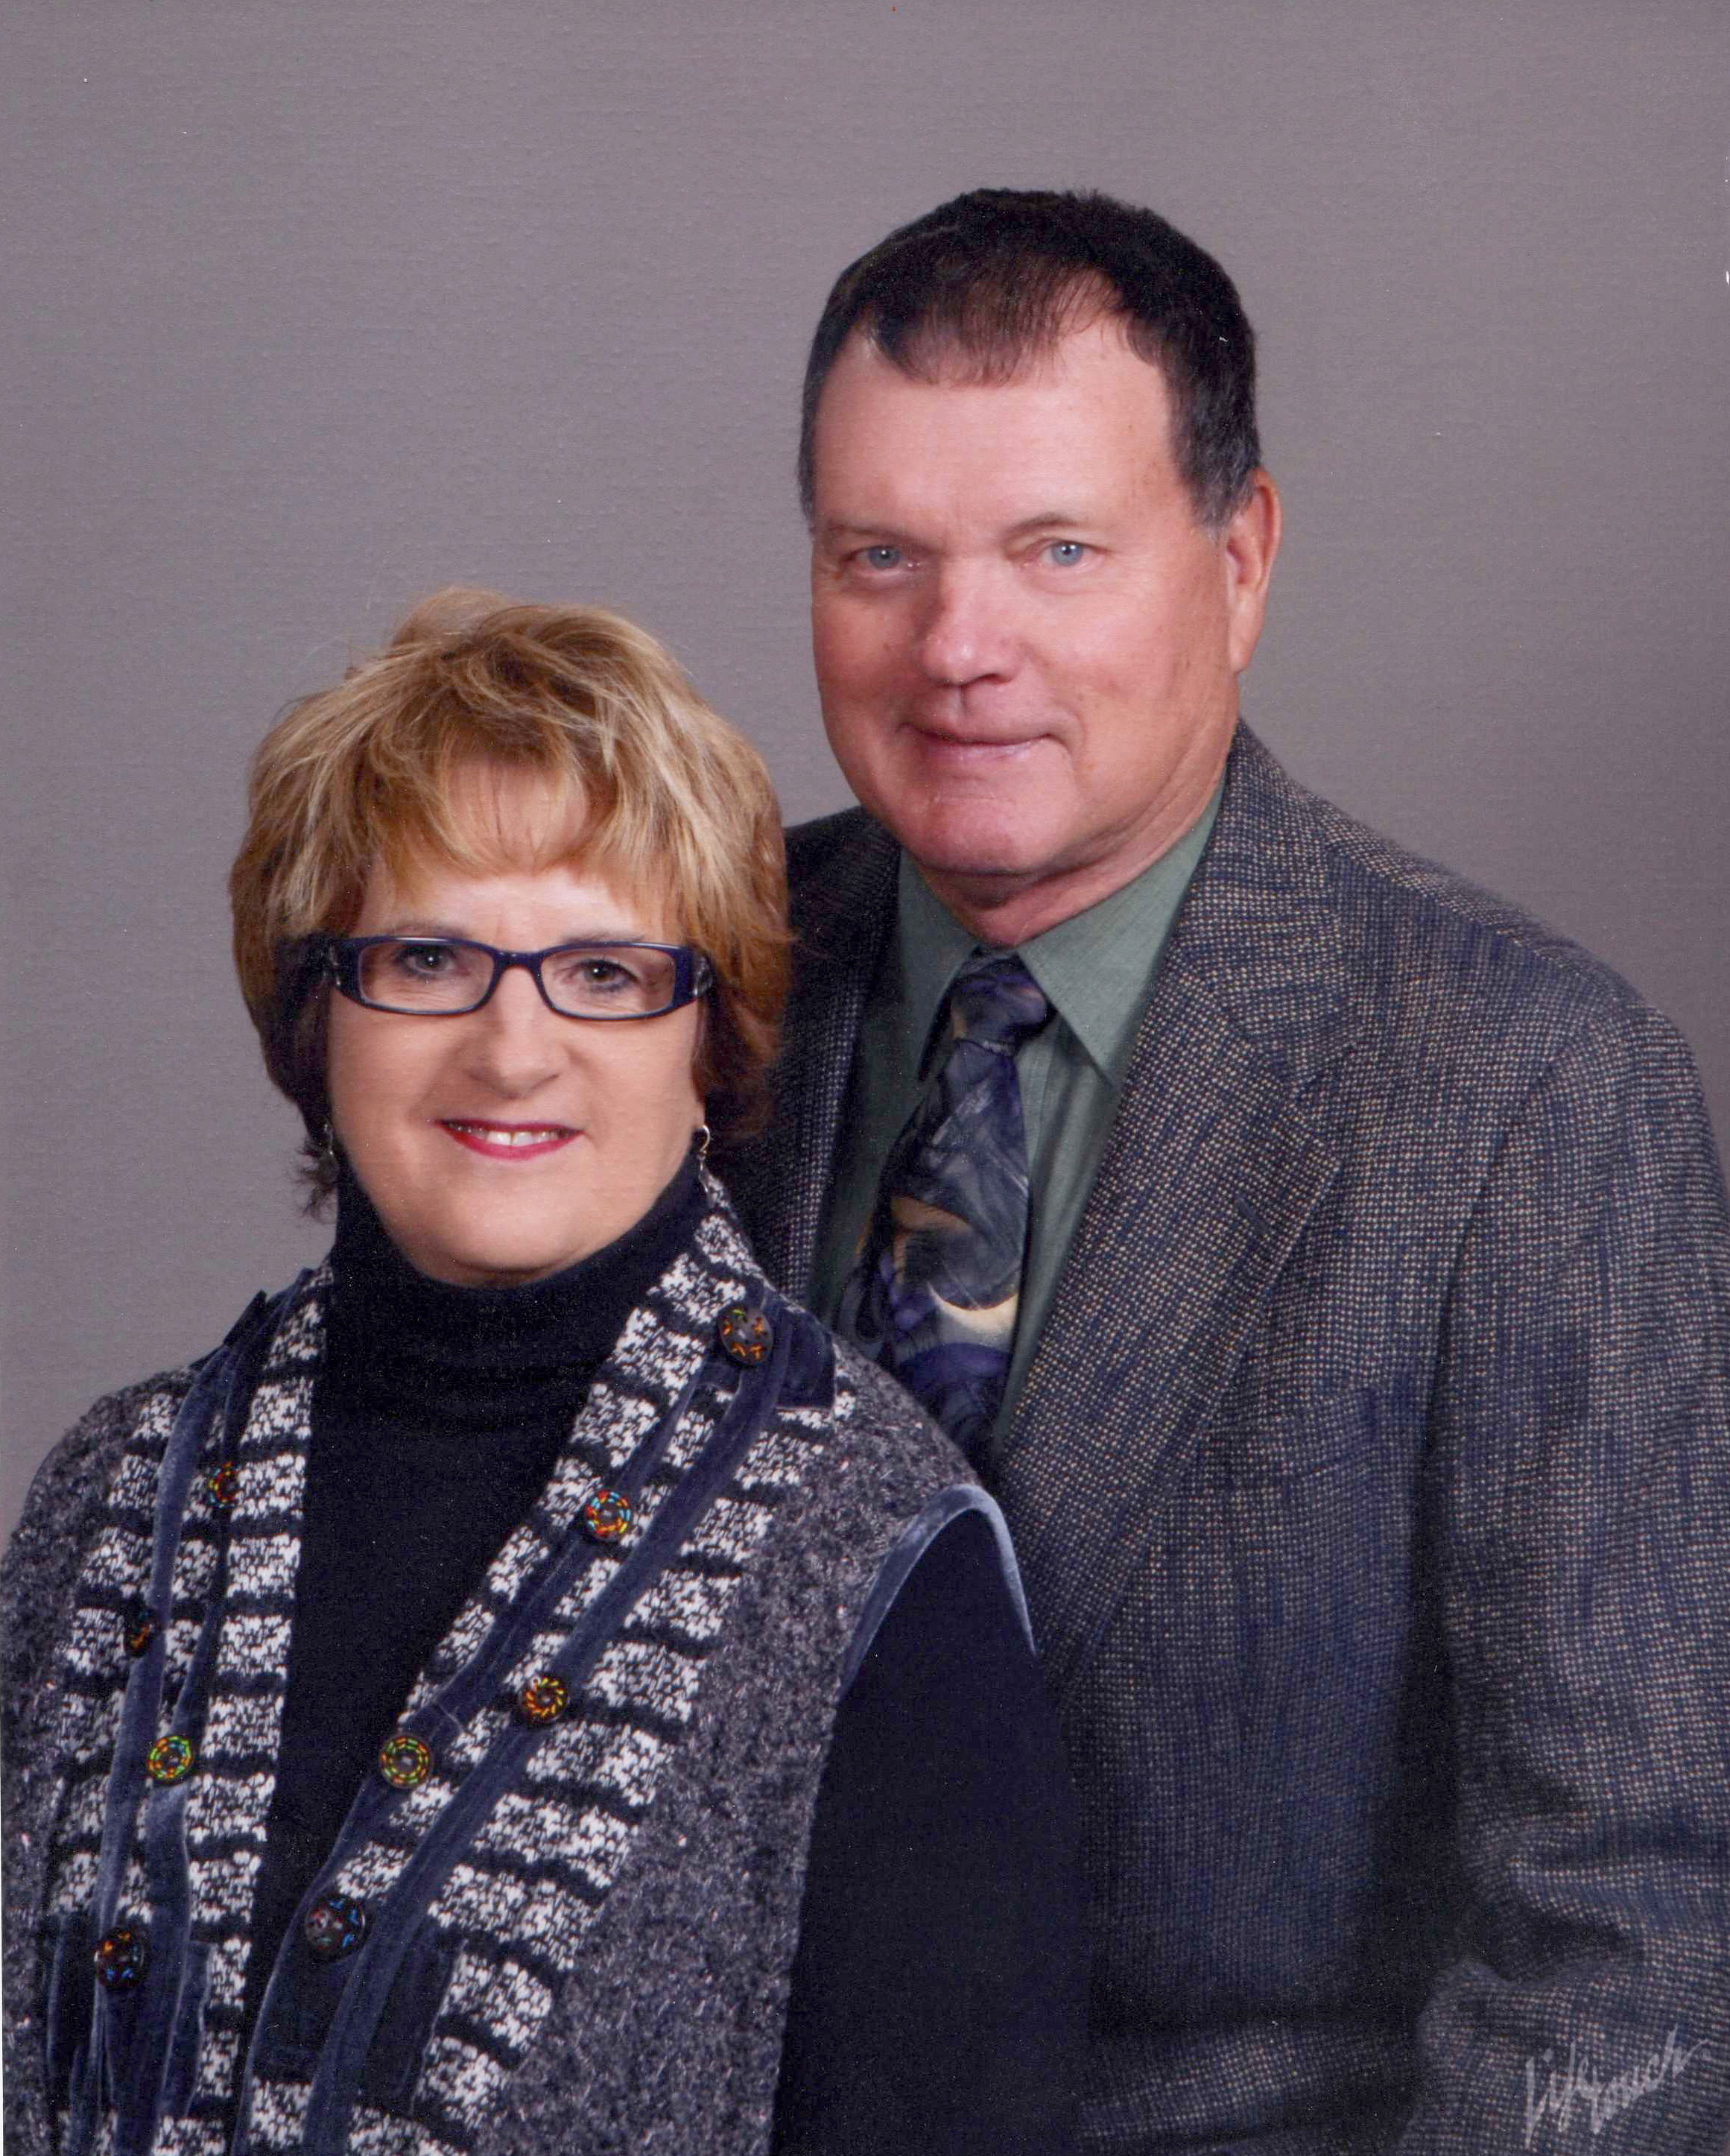 Kevin and Nancy Sundahl, members of the first Barton Community College graduating class, met at Barton and have been active supporters ever since. Those who know the Sundahls can give them a shout out by finding this story posted on the Barton Community College Facebook page at facebook.com/bartoncommunitycollege.